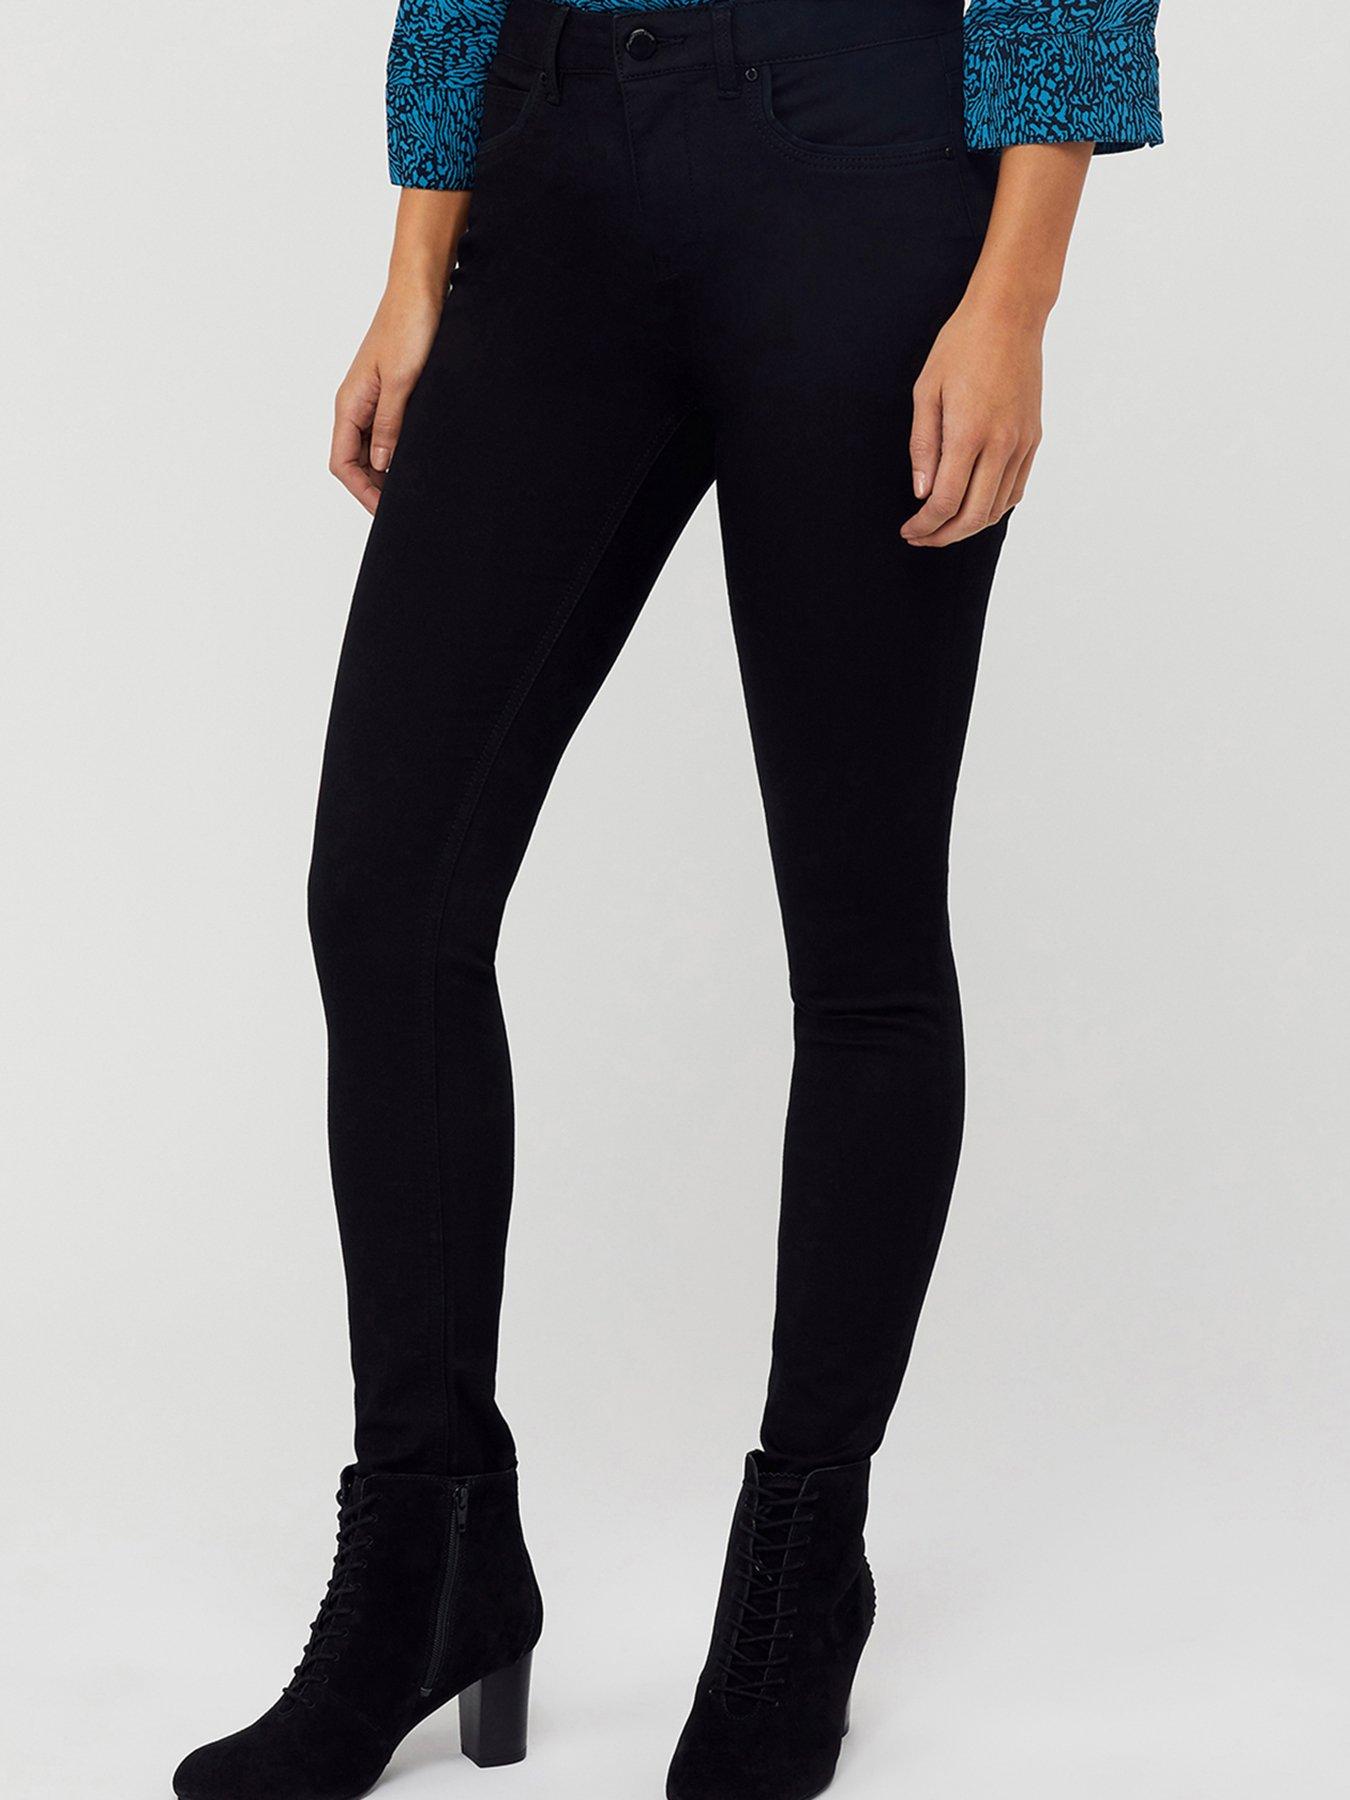 Jeans Nadine Short Length Jeans with Organic Cotton - Black